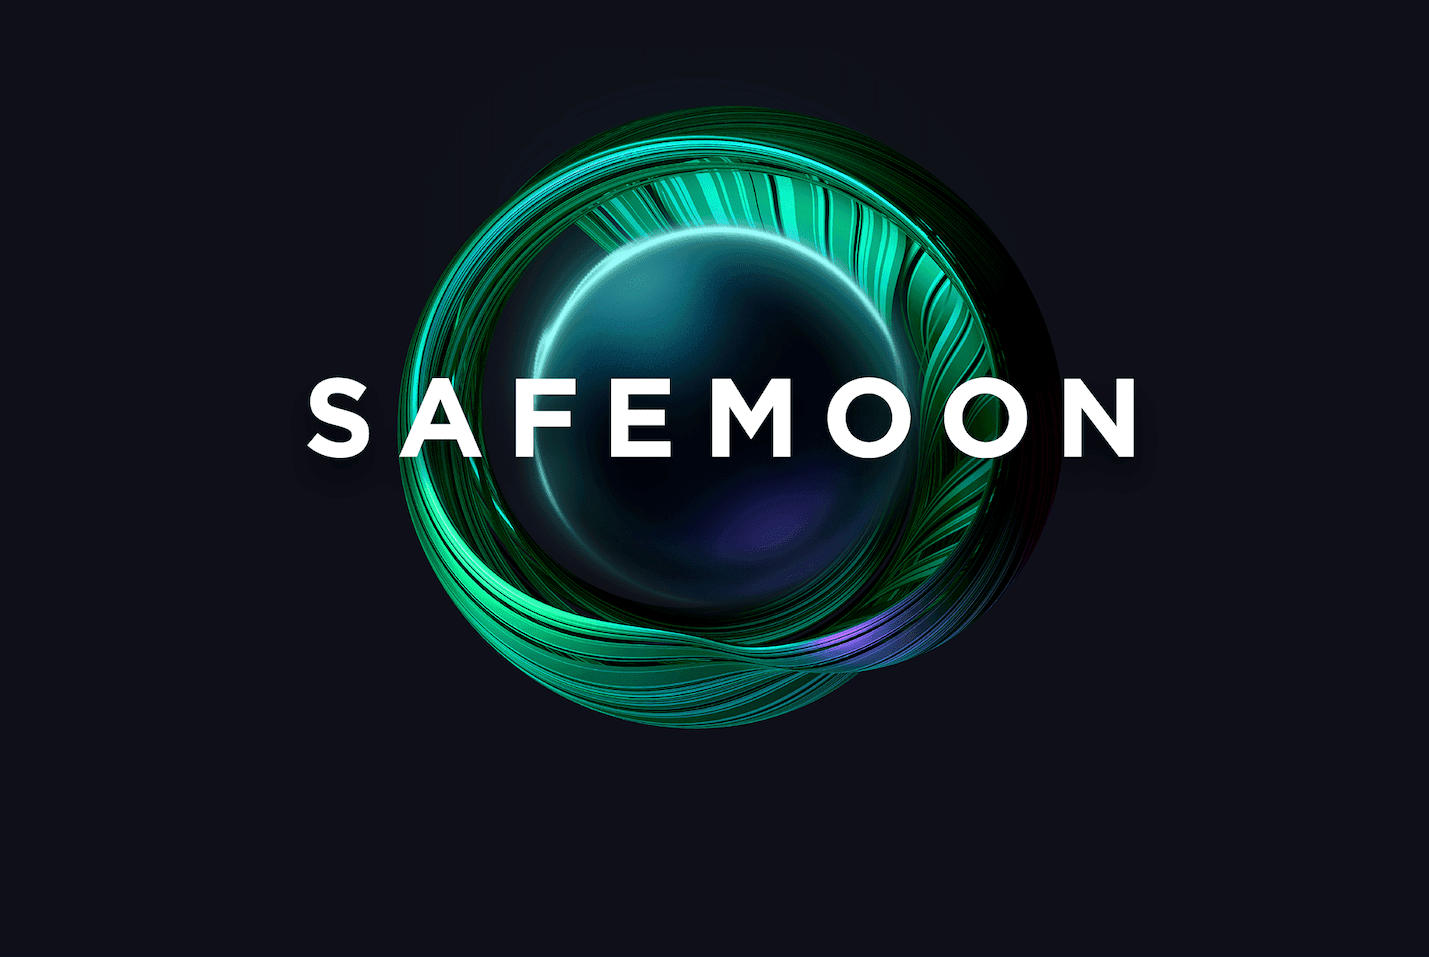 SafeMoon CEO Released on Bail Amid Legal Turmoil, Faces Potential Public Defender